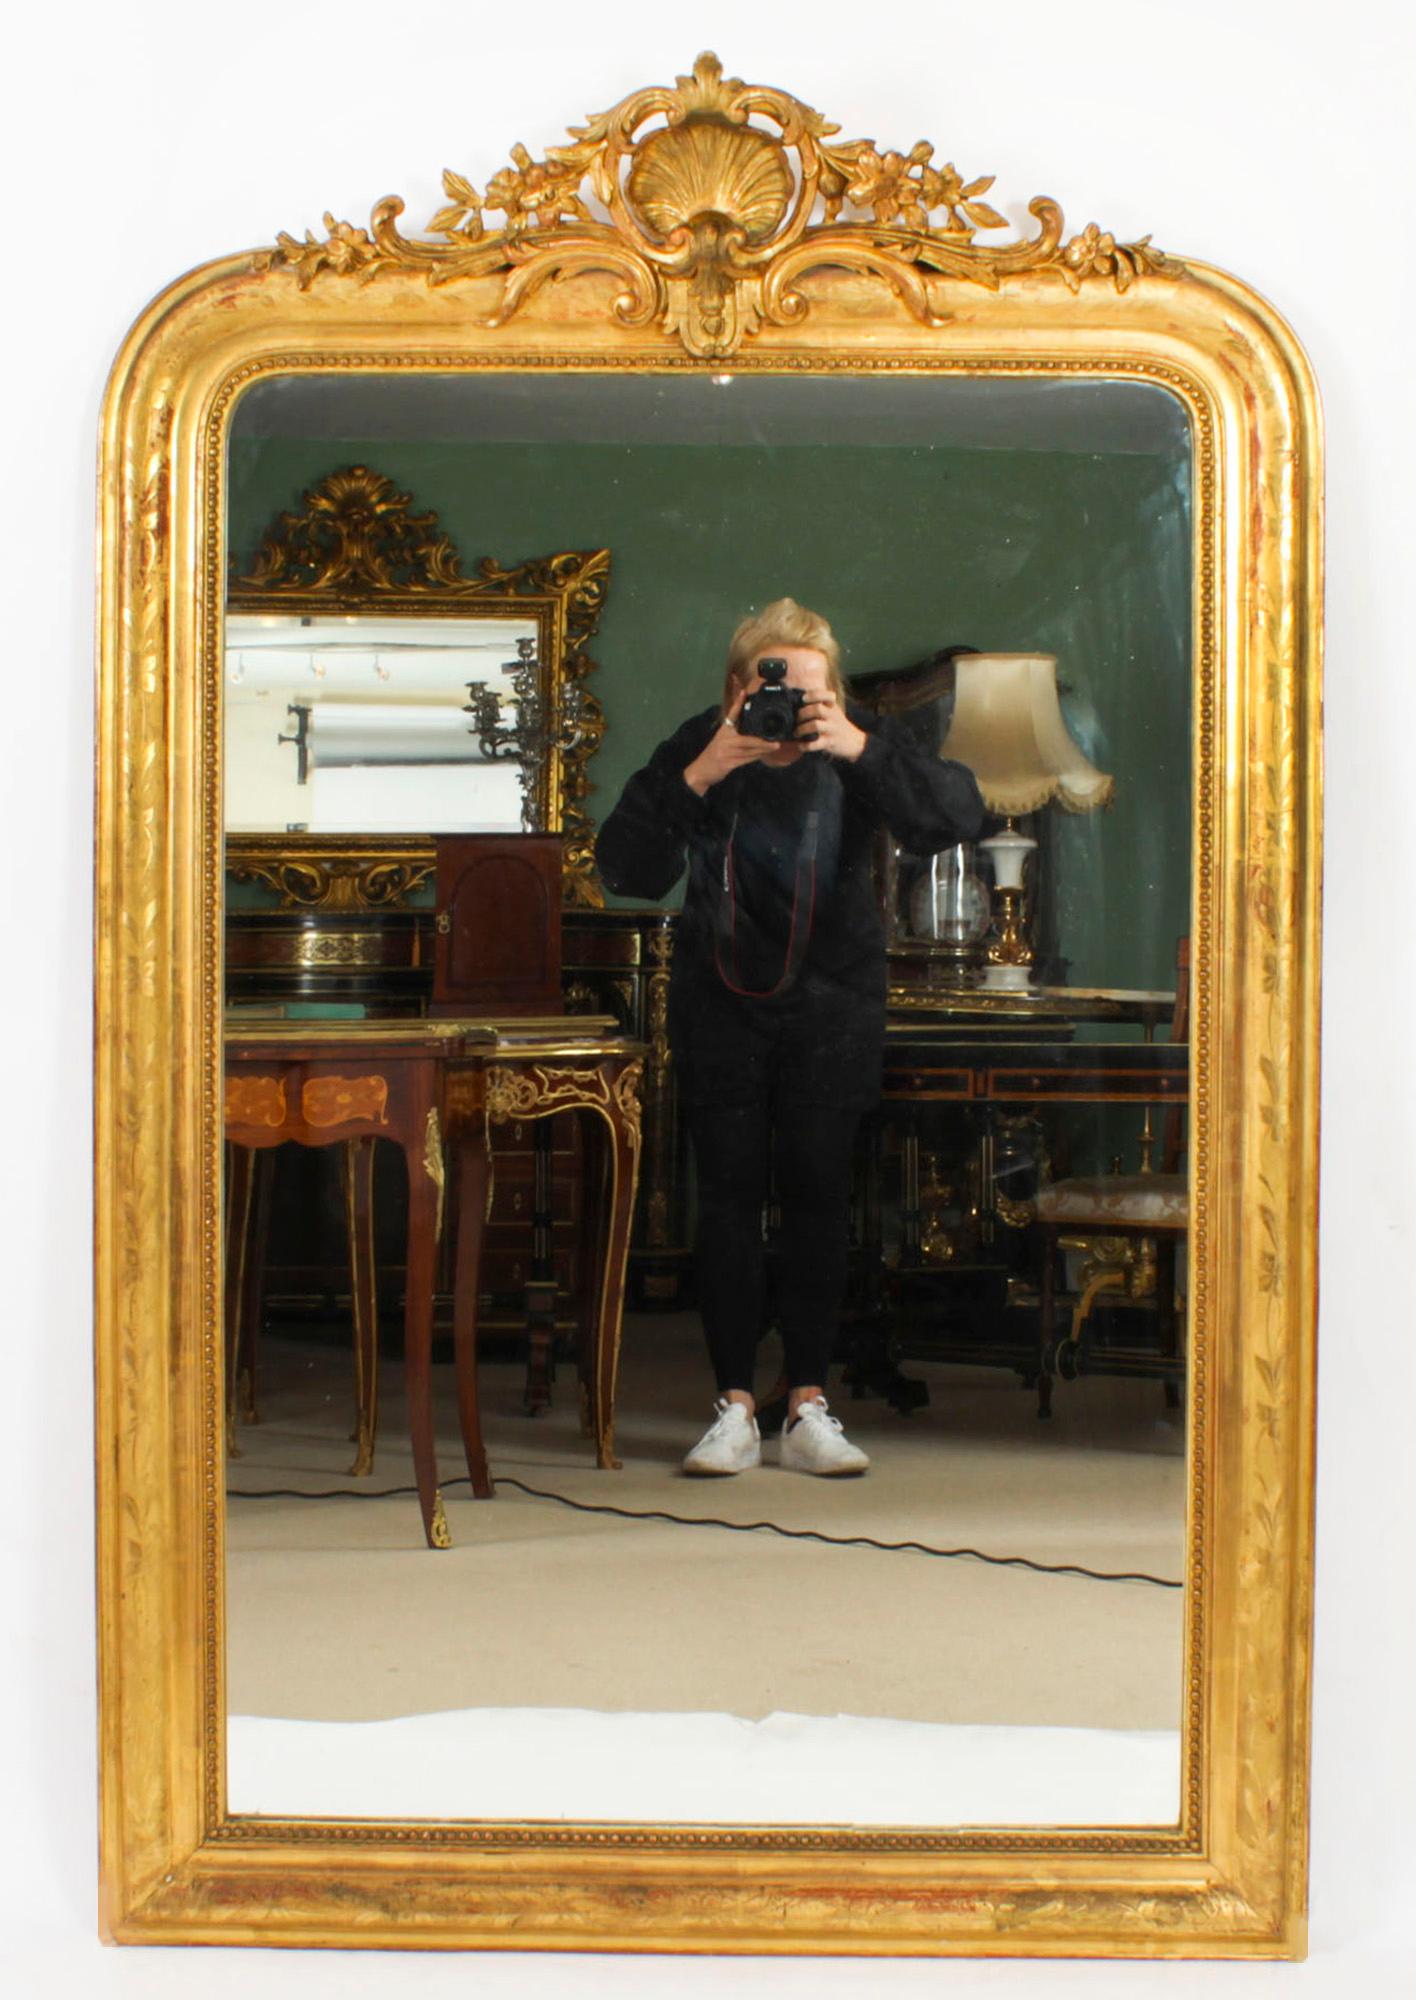 This is a large impressive antique French carved giltwood and gesso wall mirror, circa 1860 in date.
 
The frame is surmounted with a striking carved giltwood central finial with anthemion, acanthus leaf, foliage and berries decoration. The